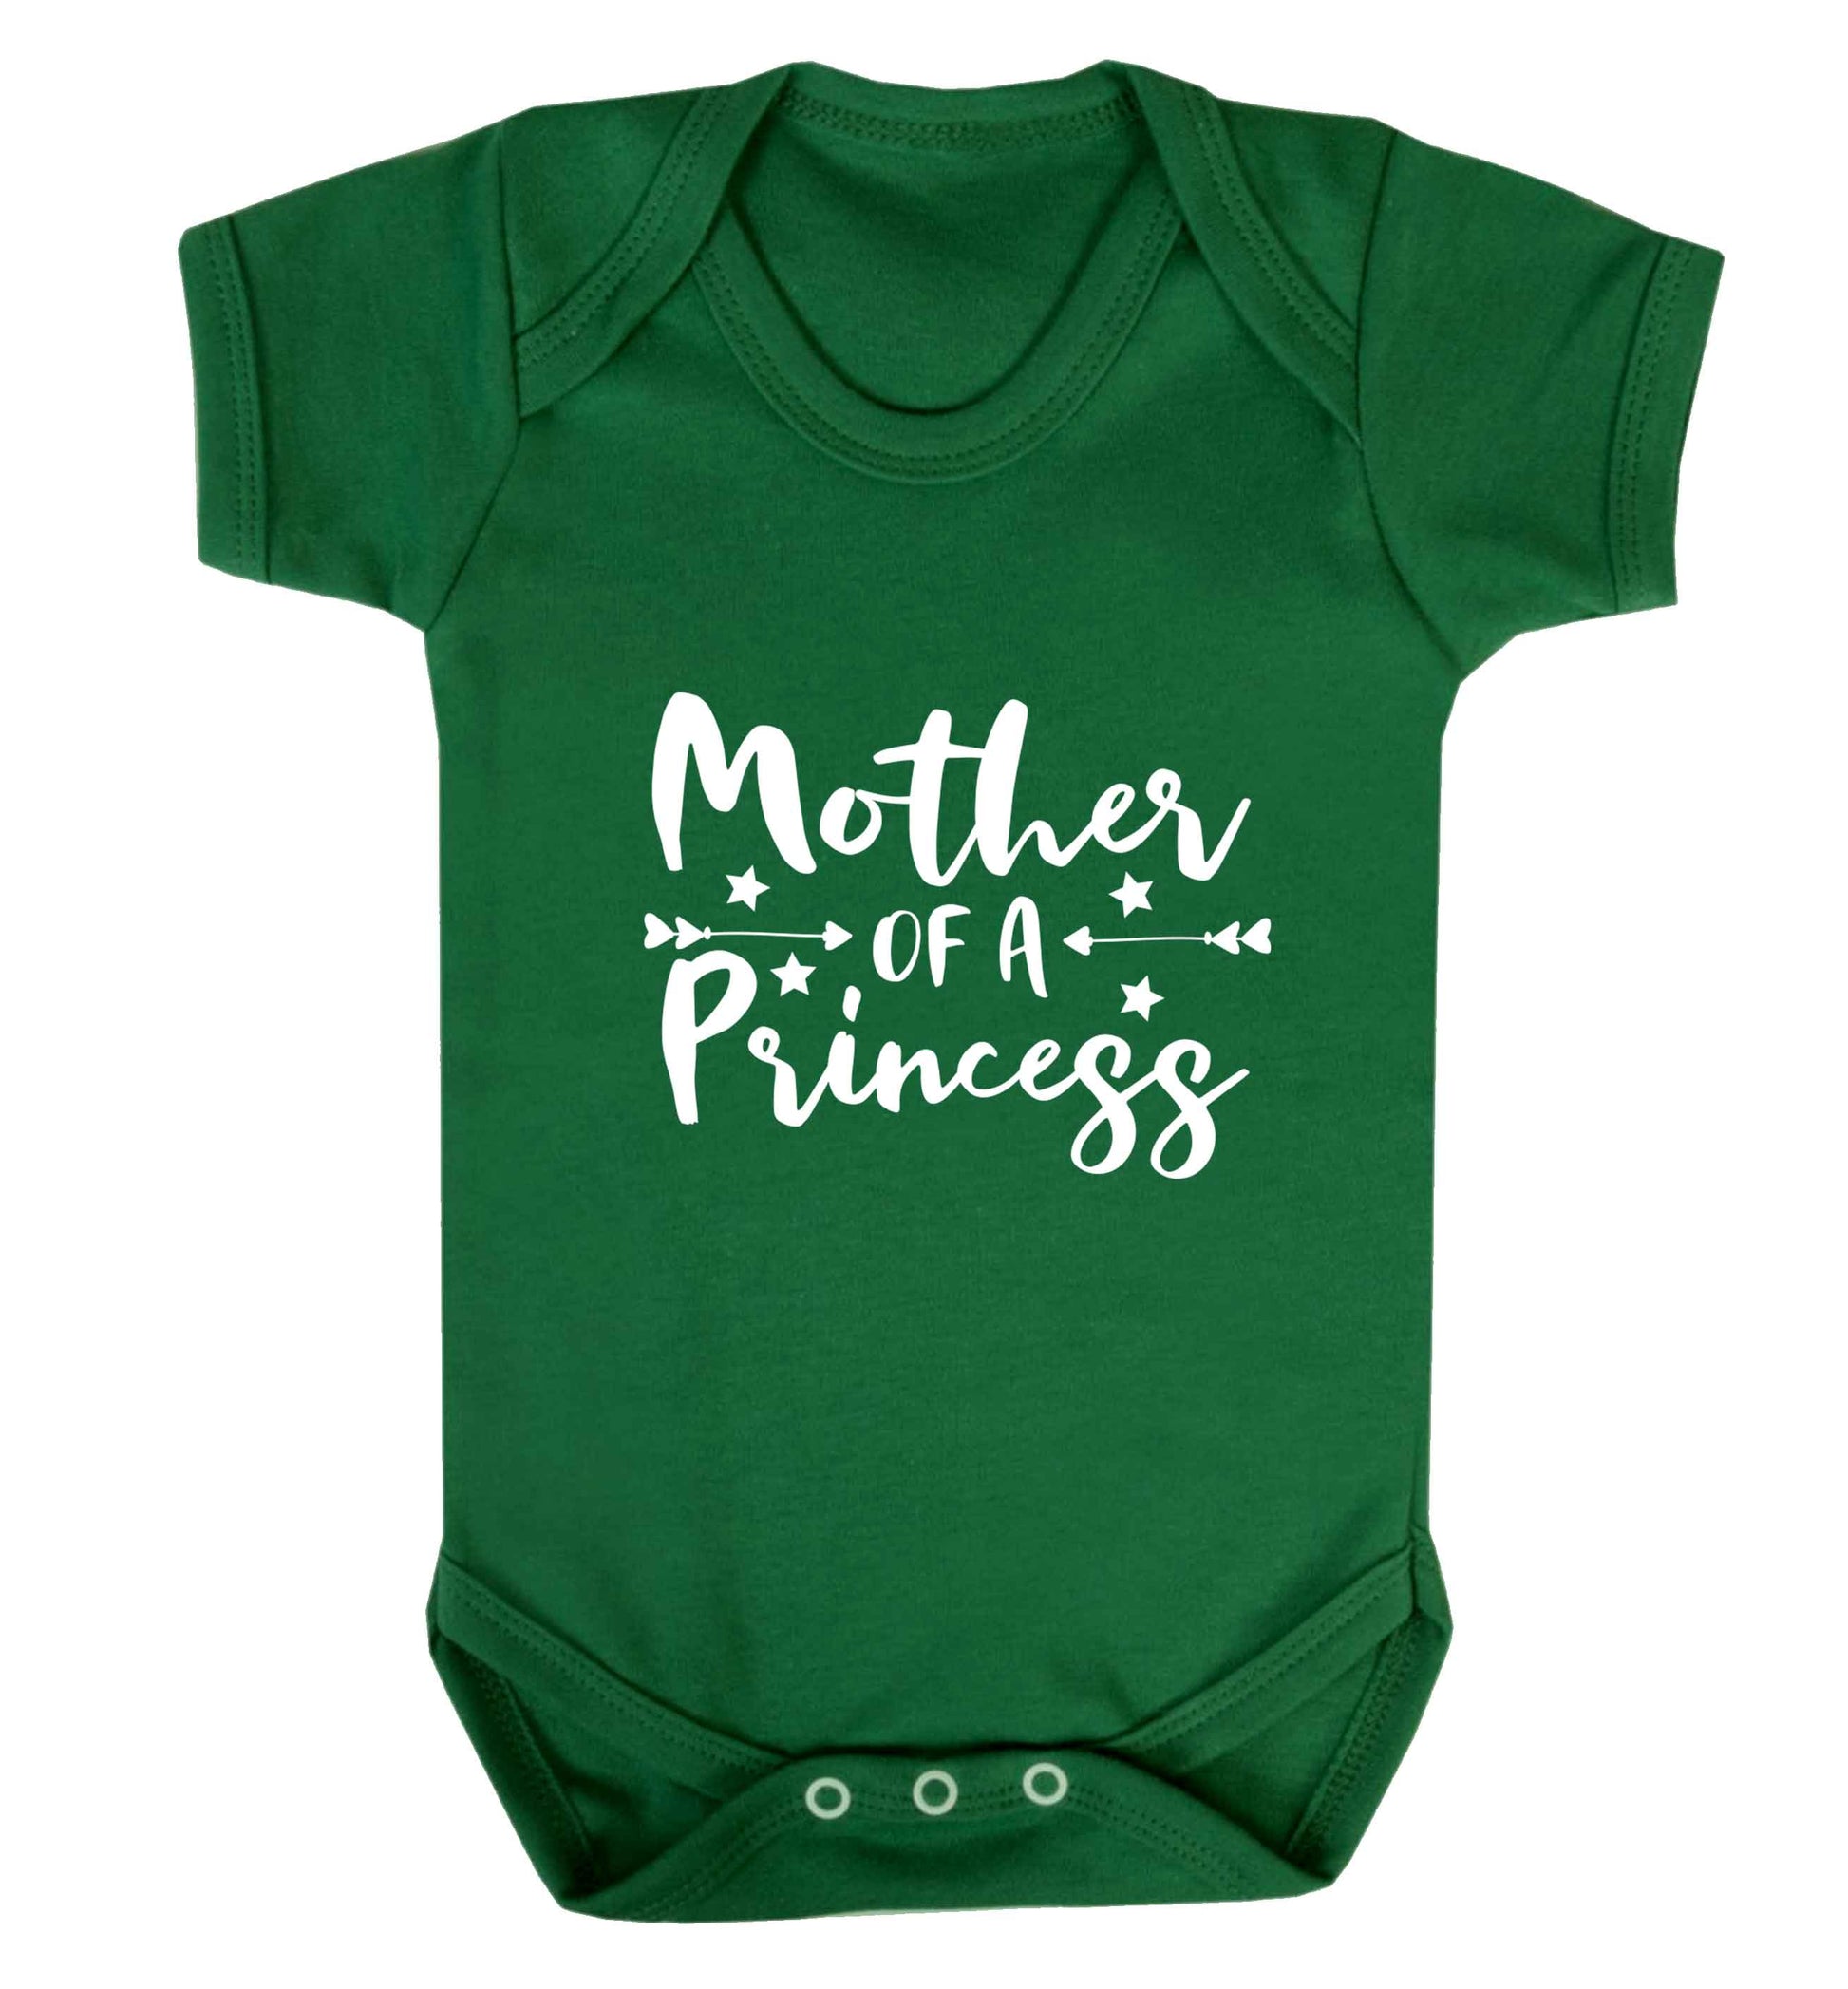 Mother of a princess baby vest green 18-24 months